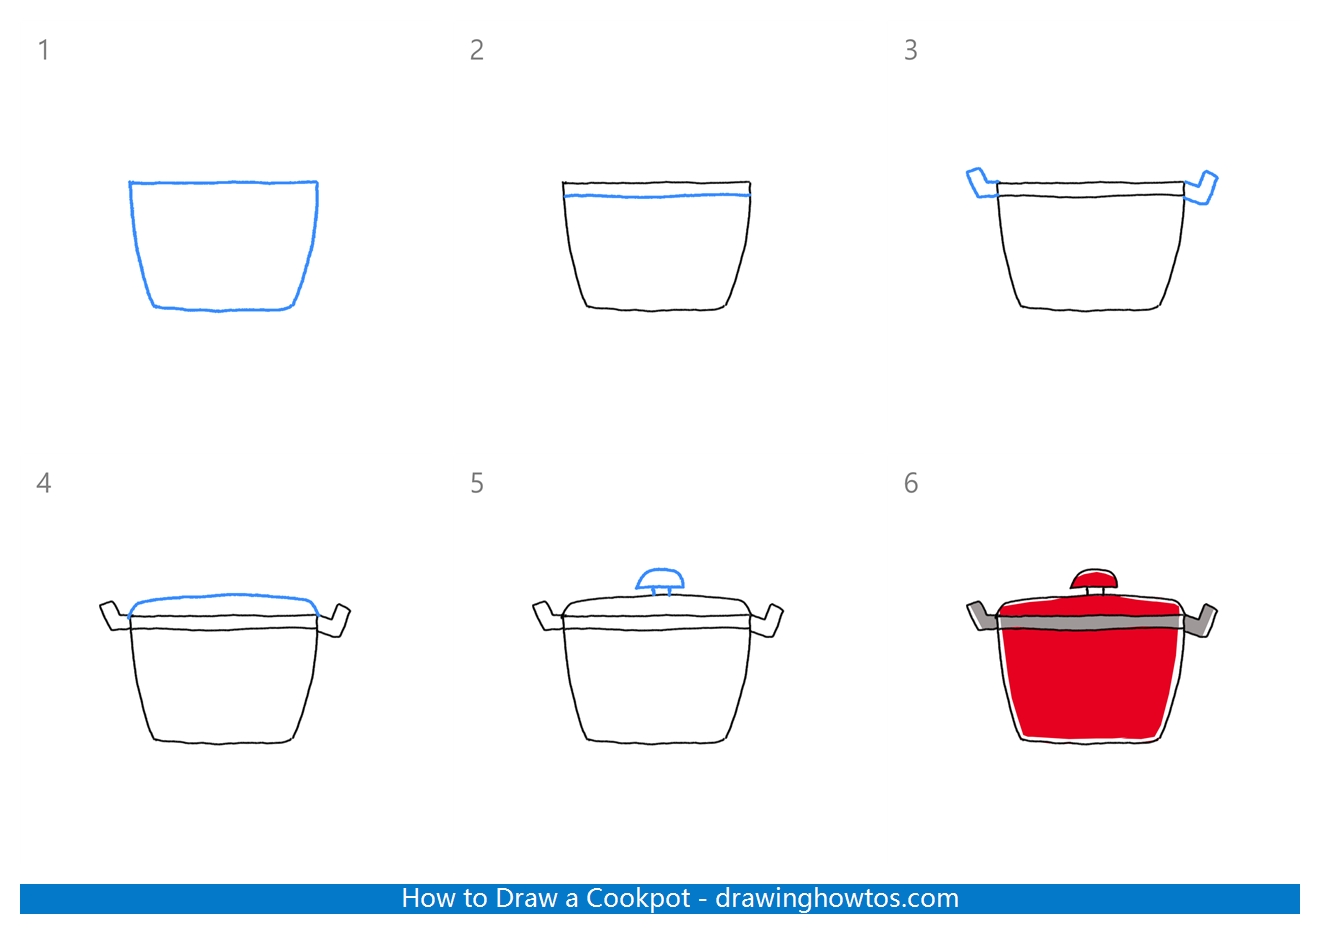 How to Draw a Cookpot Step by Step